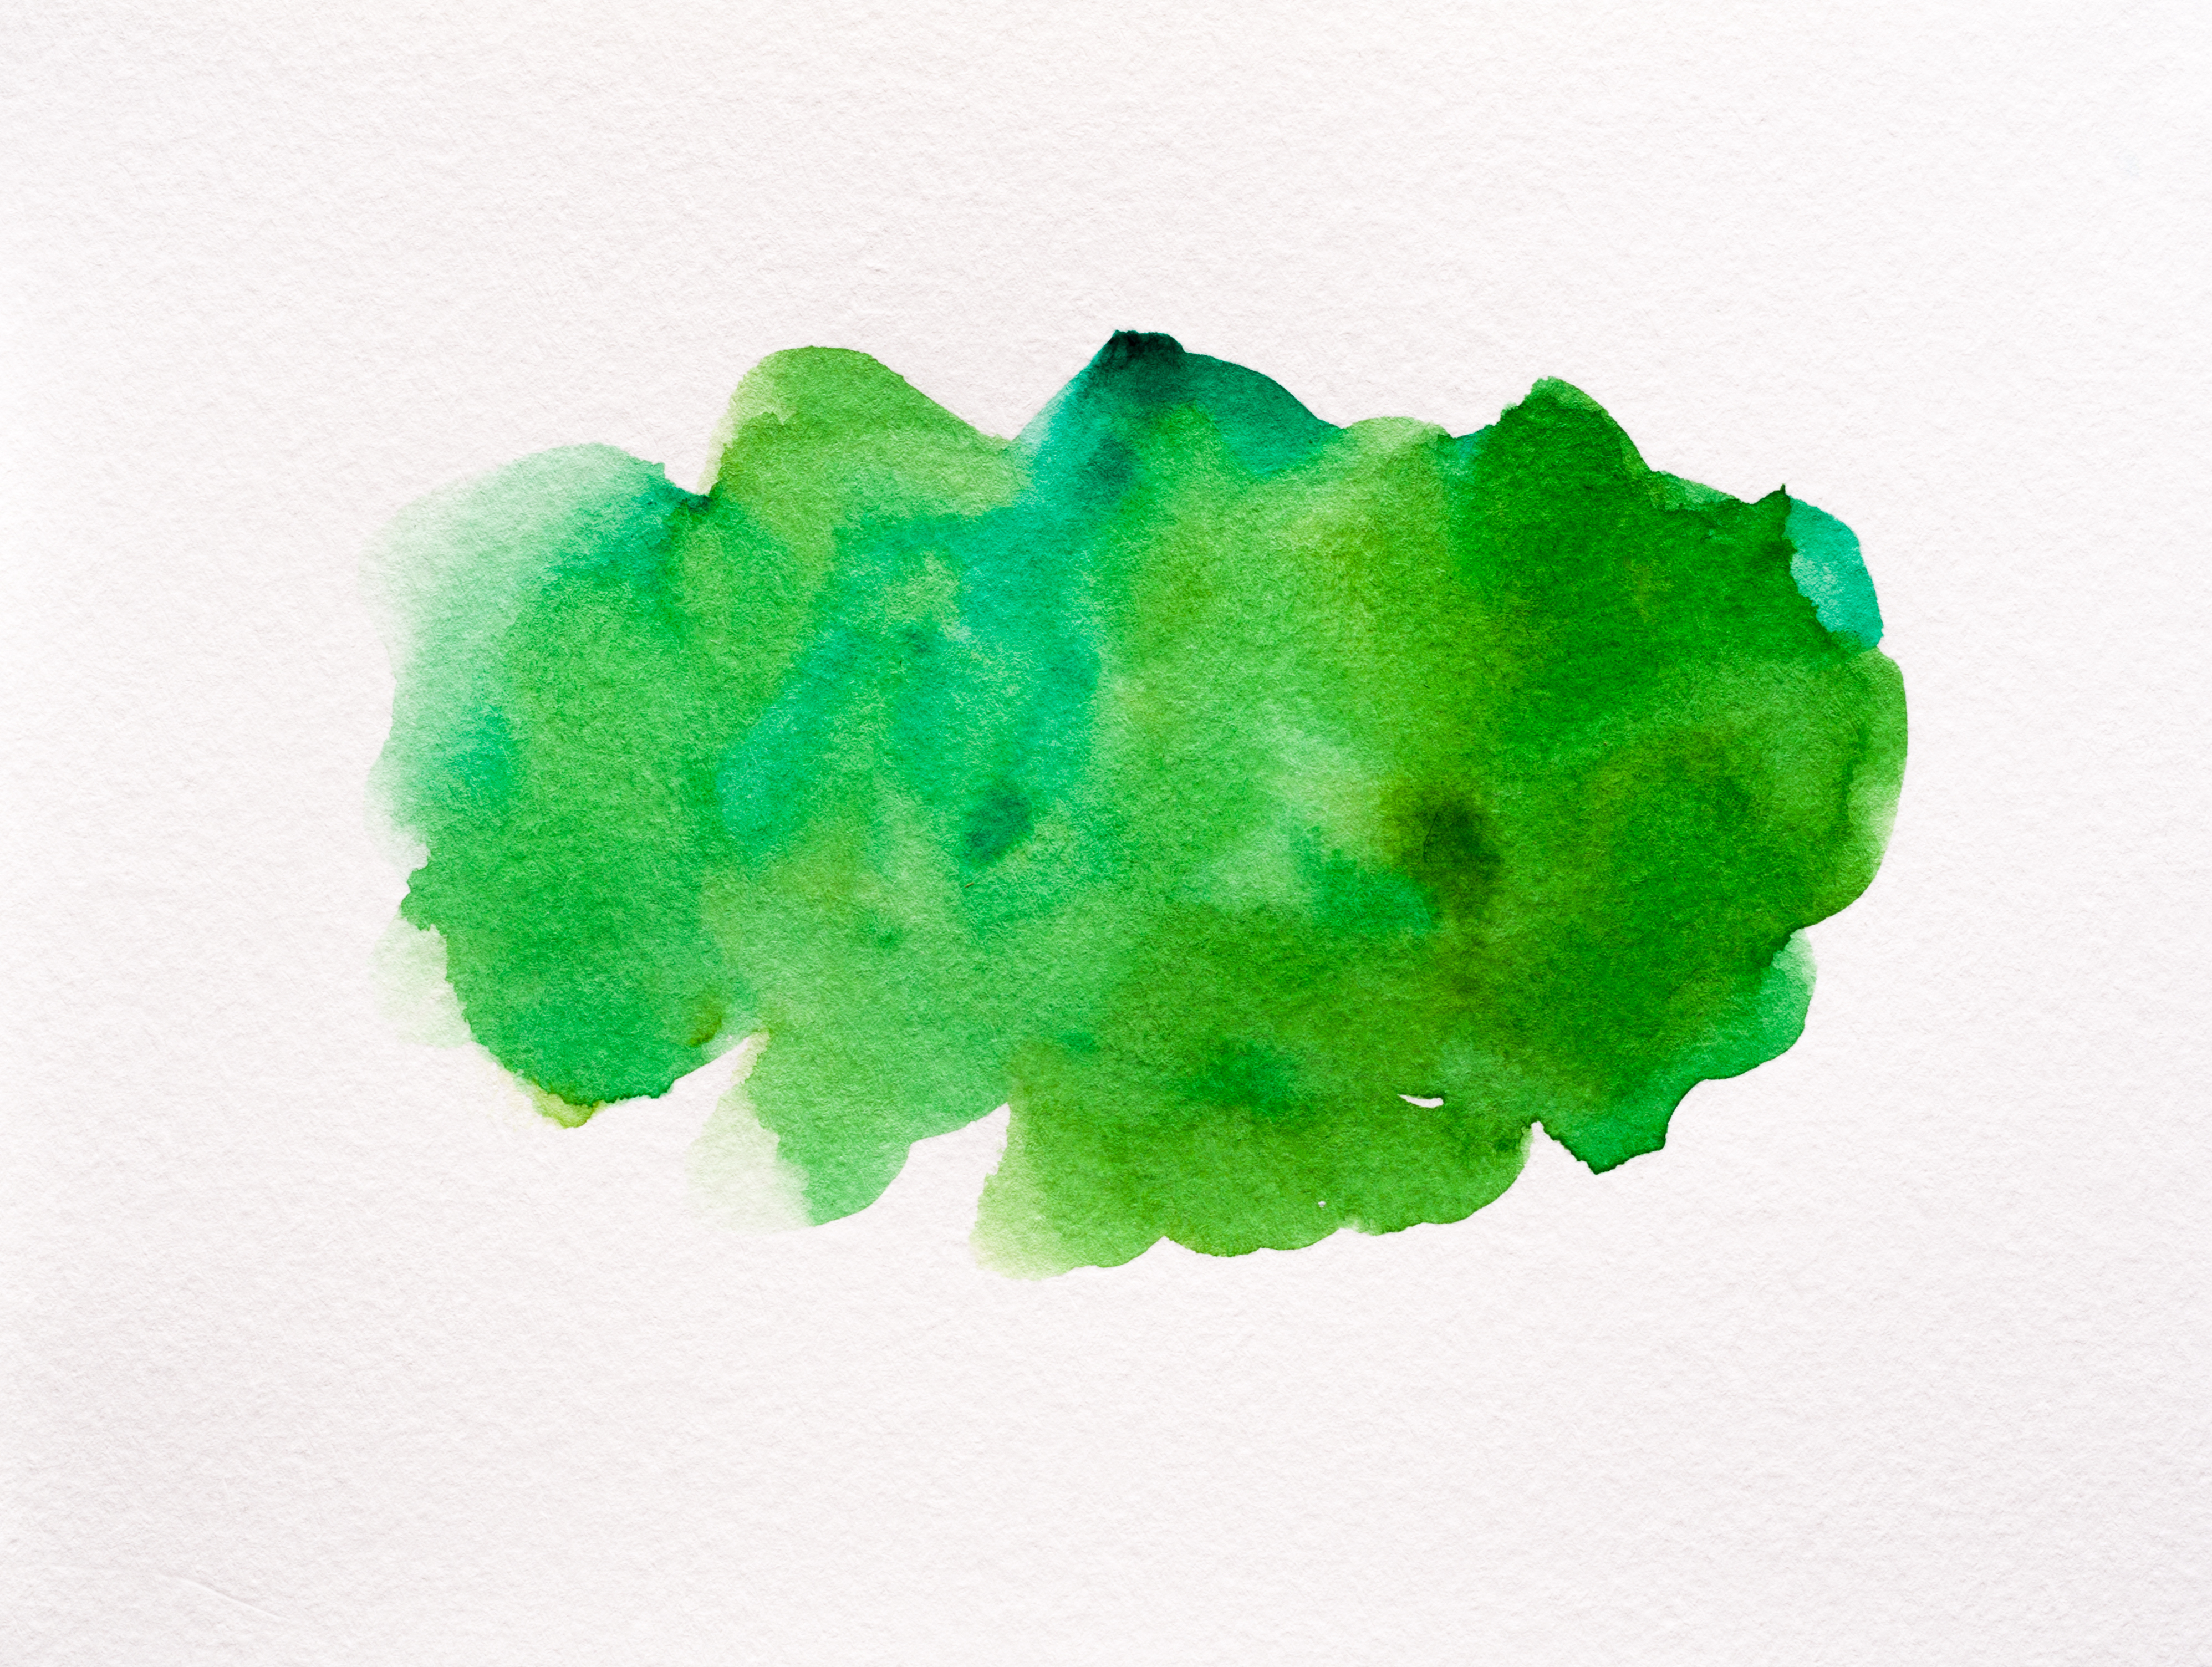 A greenish smear of color